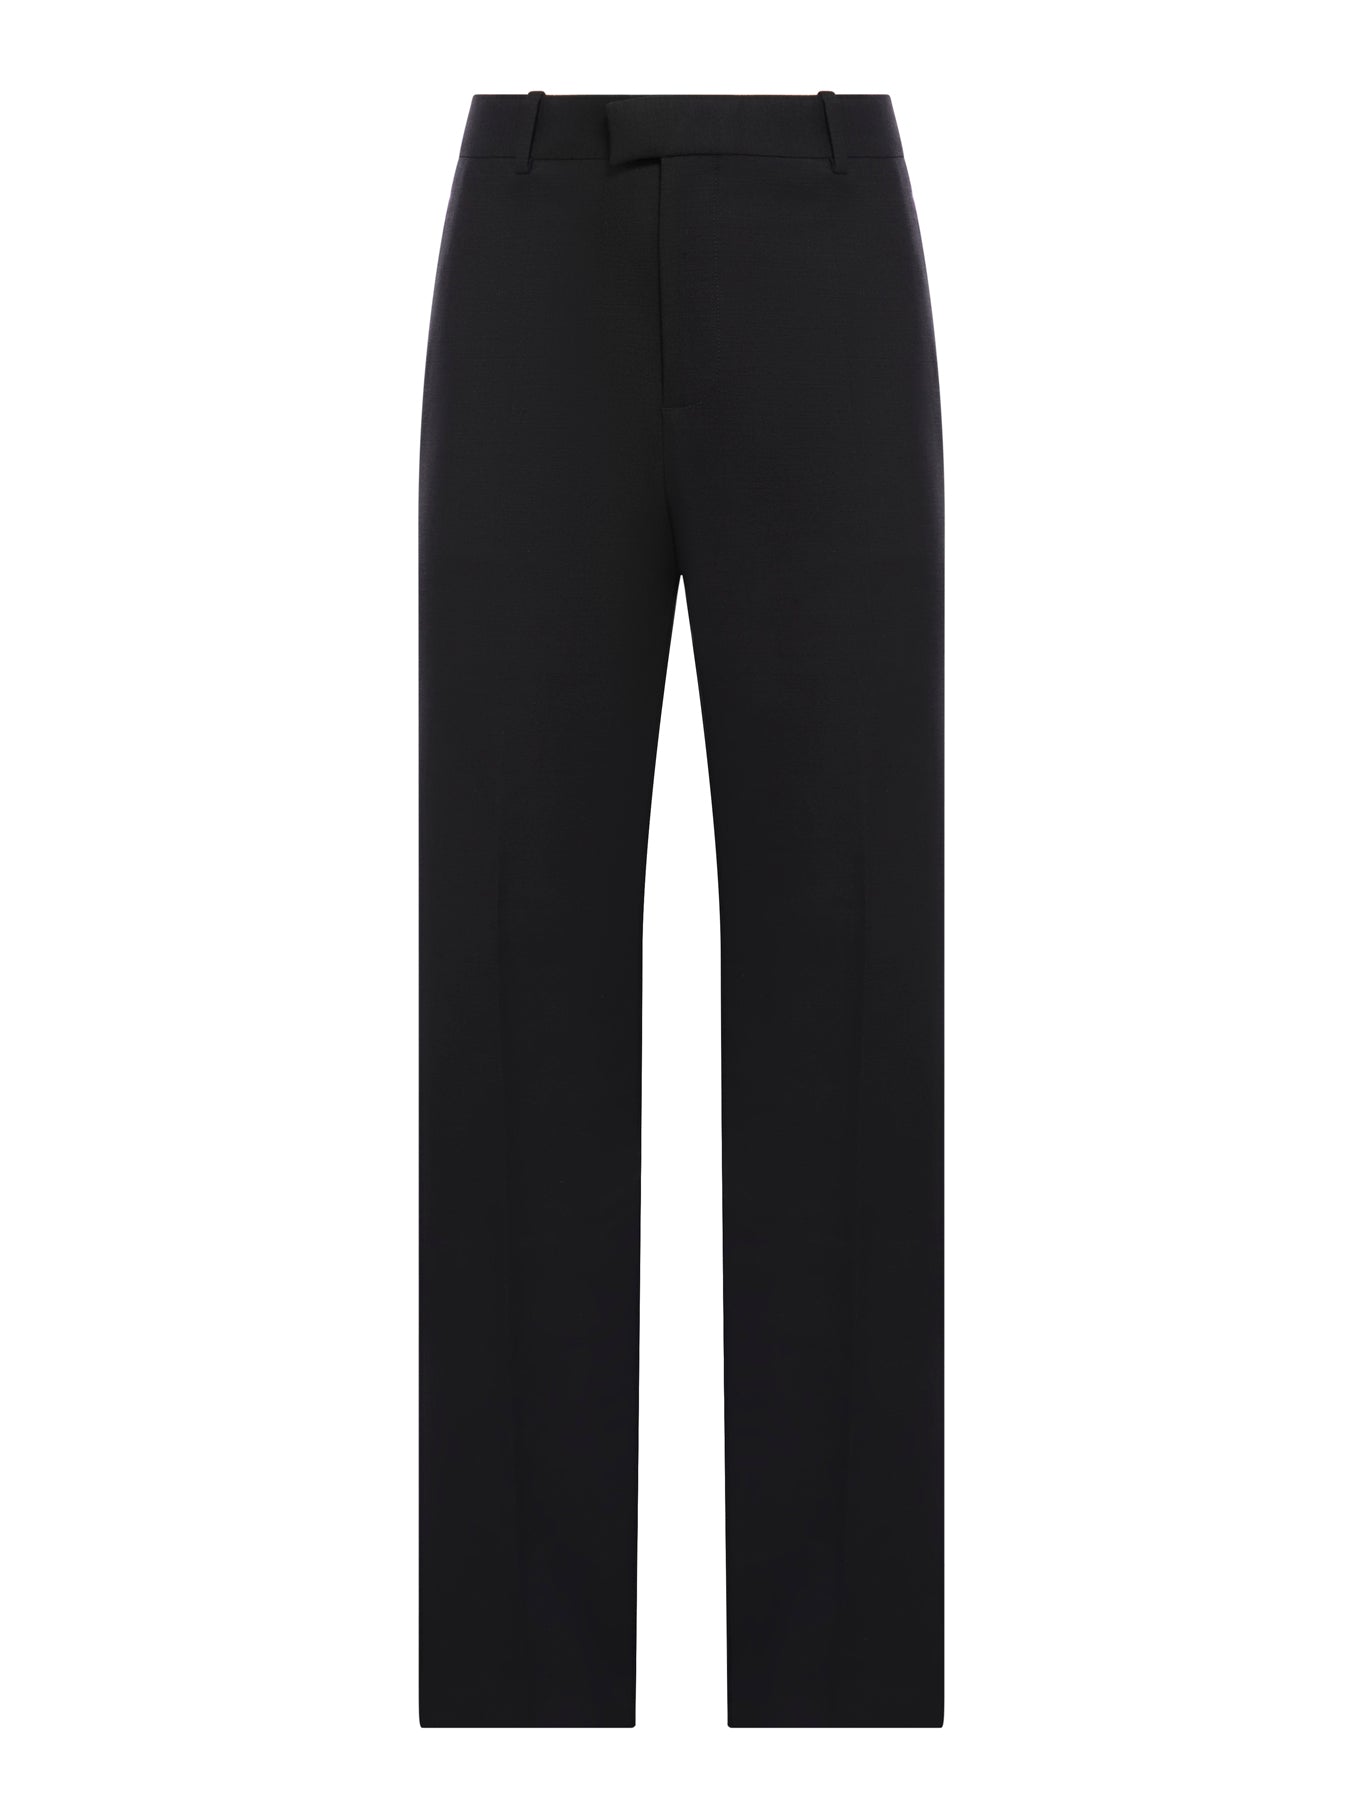 STRUCTURED COTTON PANT